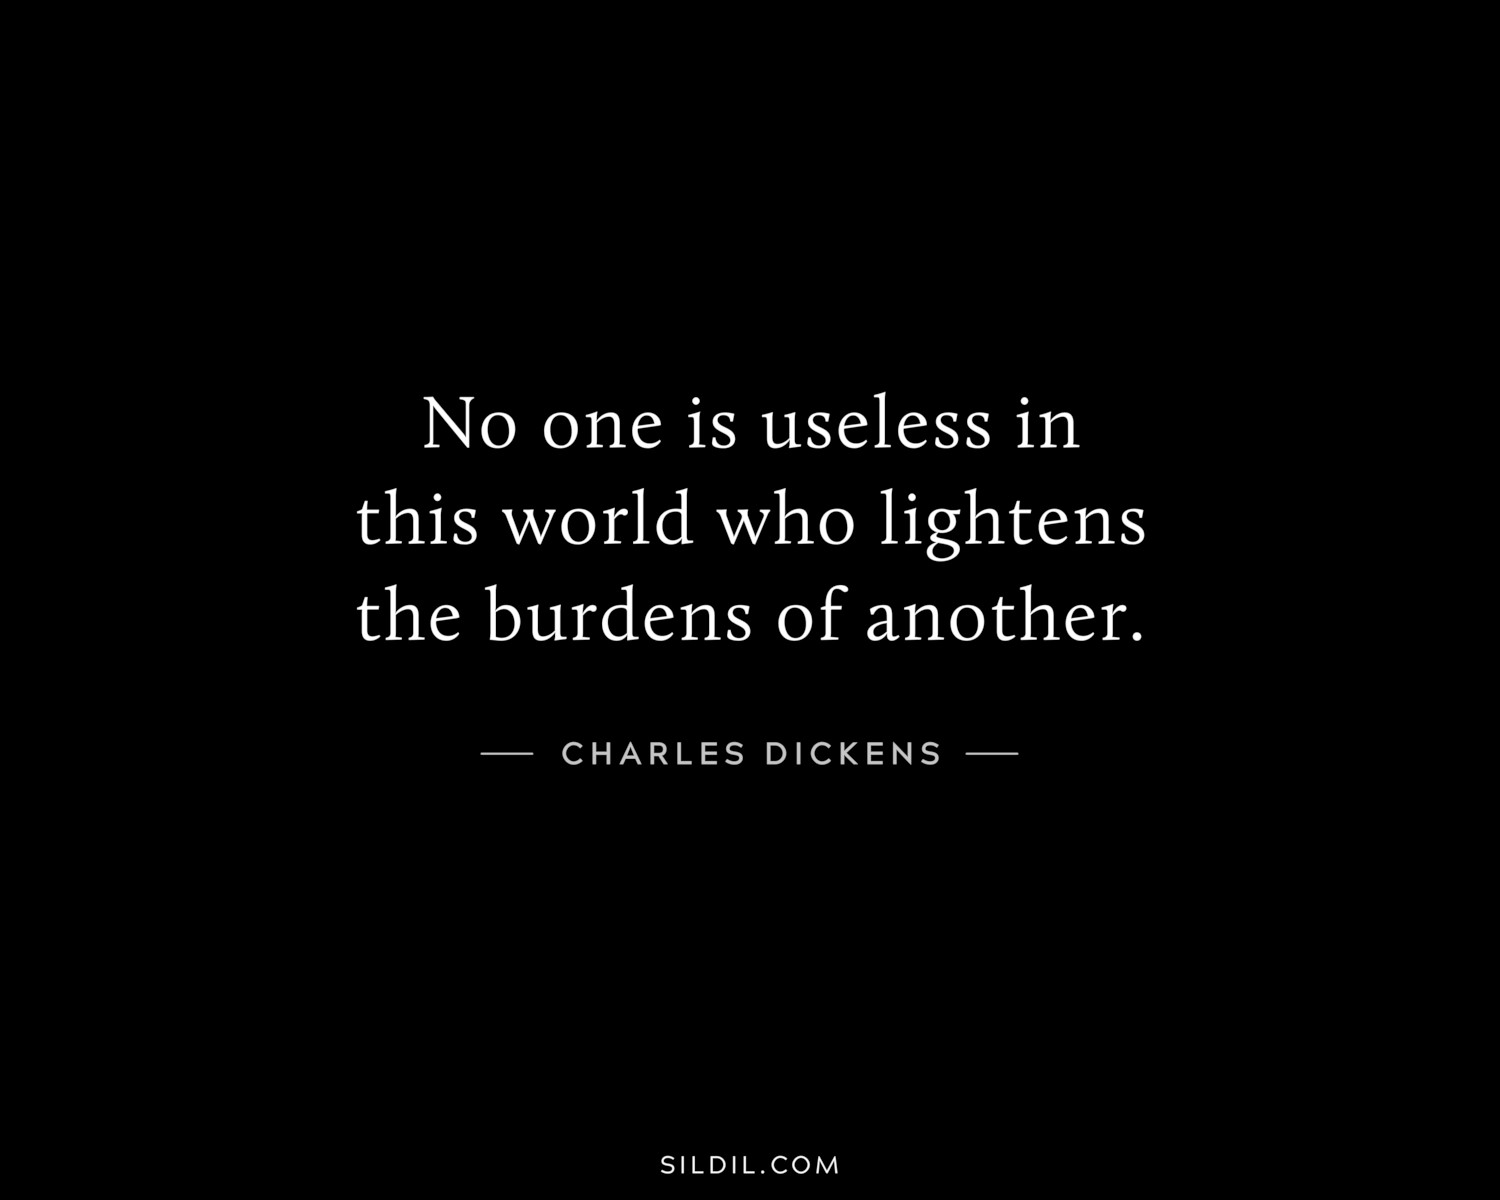 No one is useless in this world who lightens the burdens of another.